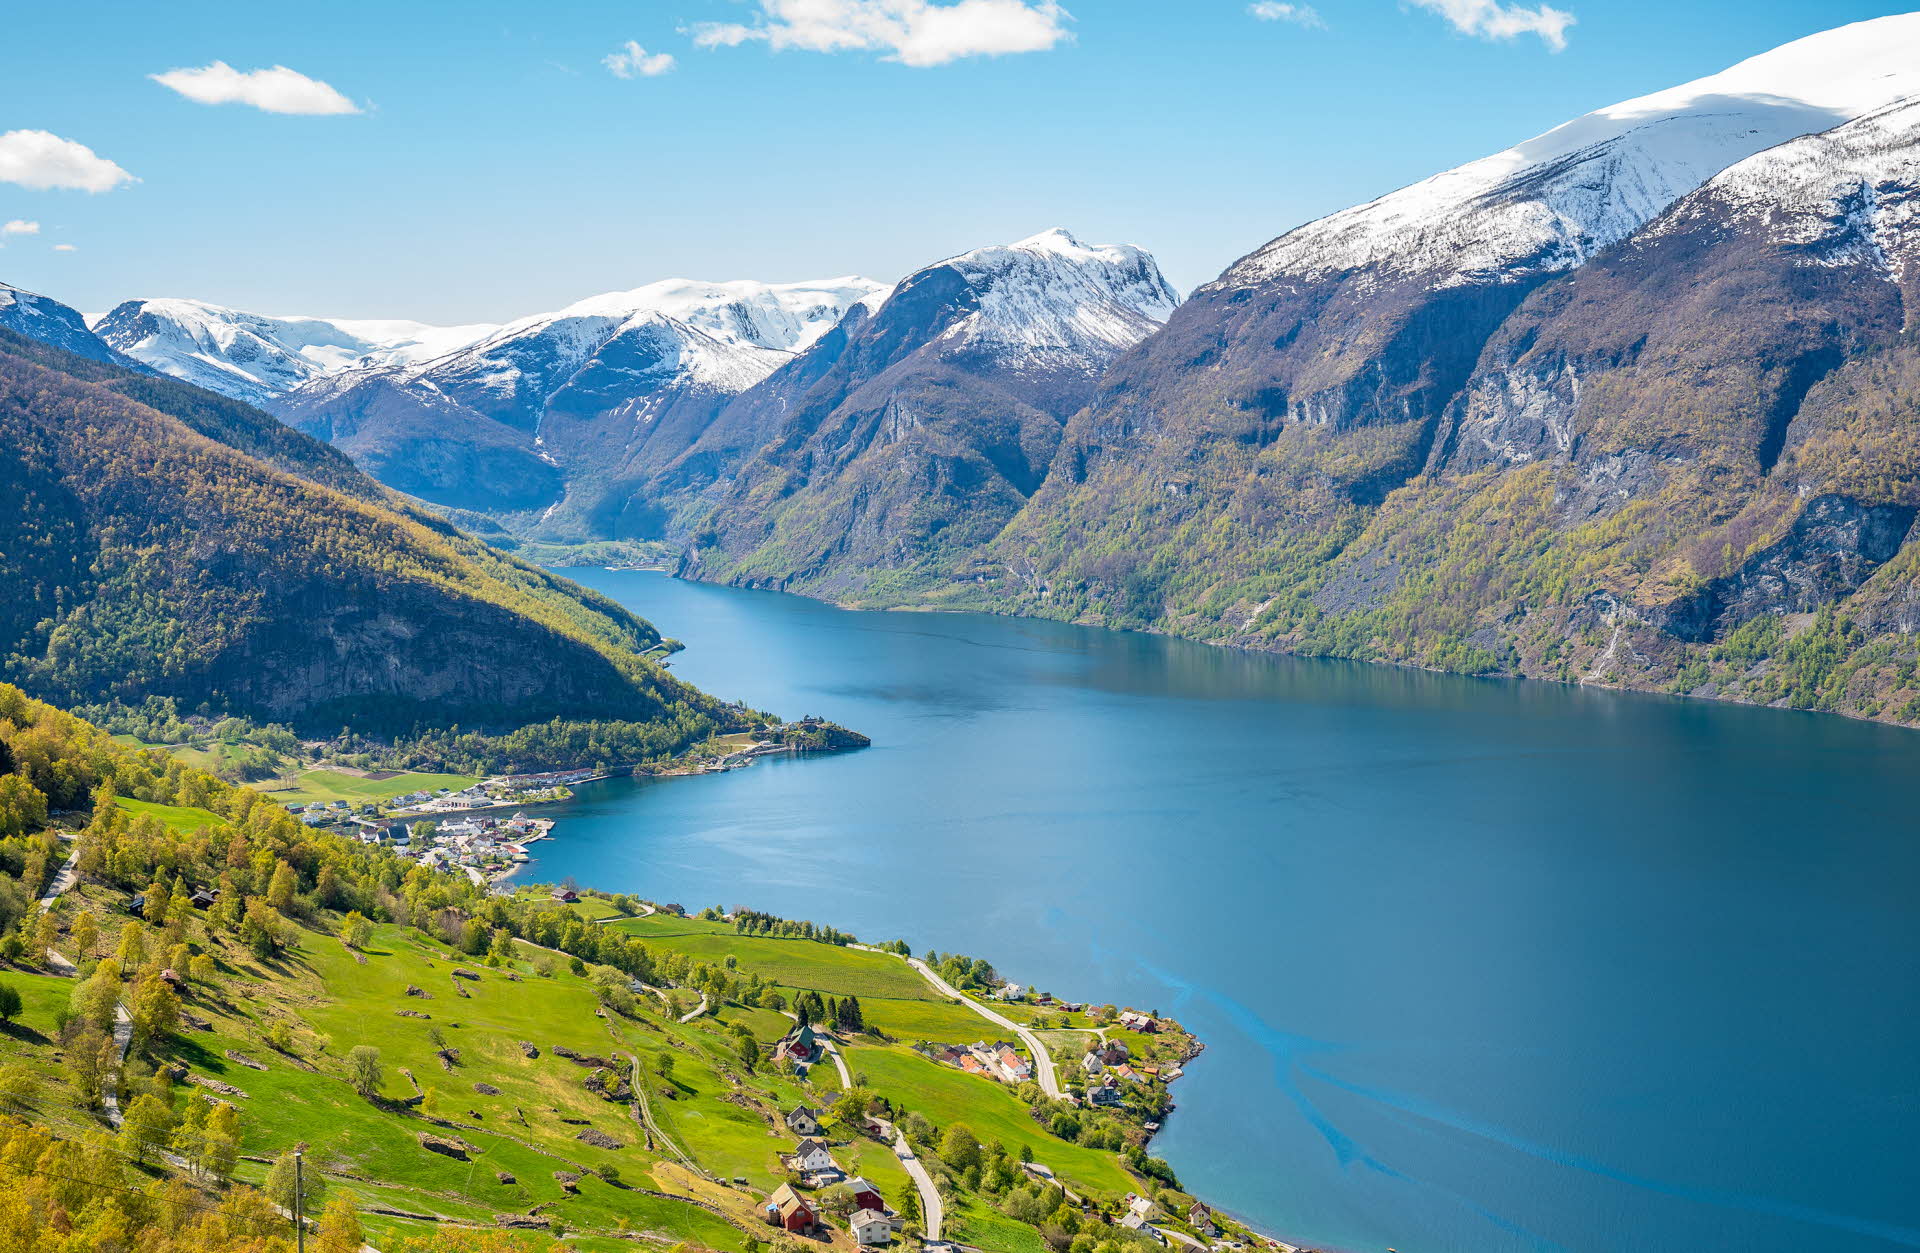 View of Aurland, Flåm, the Aurlandsfjord and surrounding mountains on a sunny spring day. 